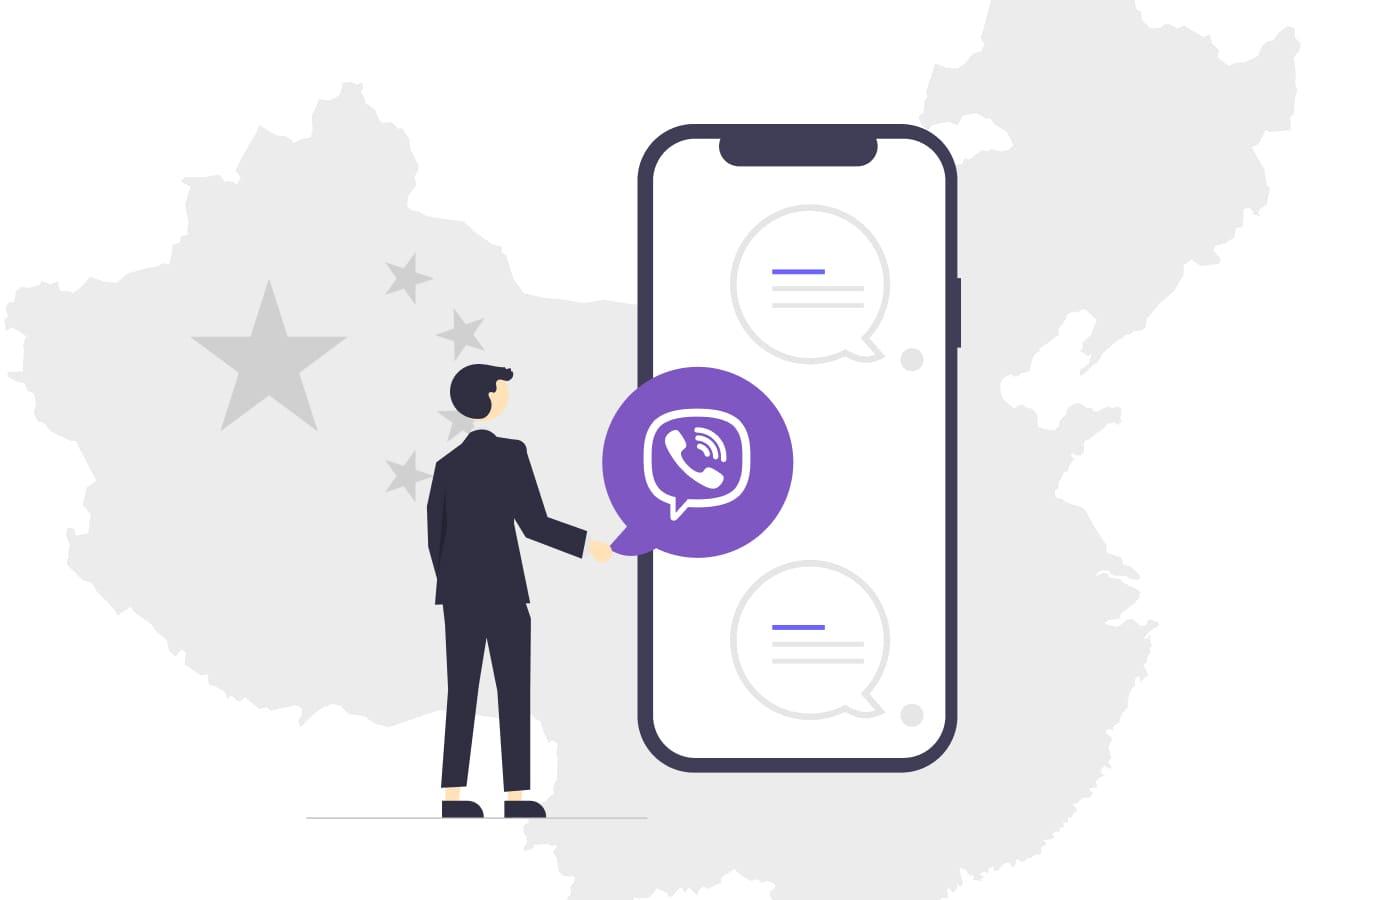 Does Viber work in China?